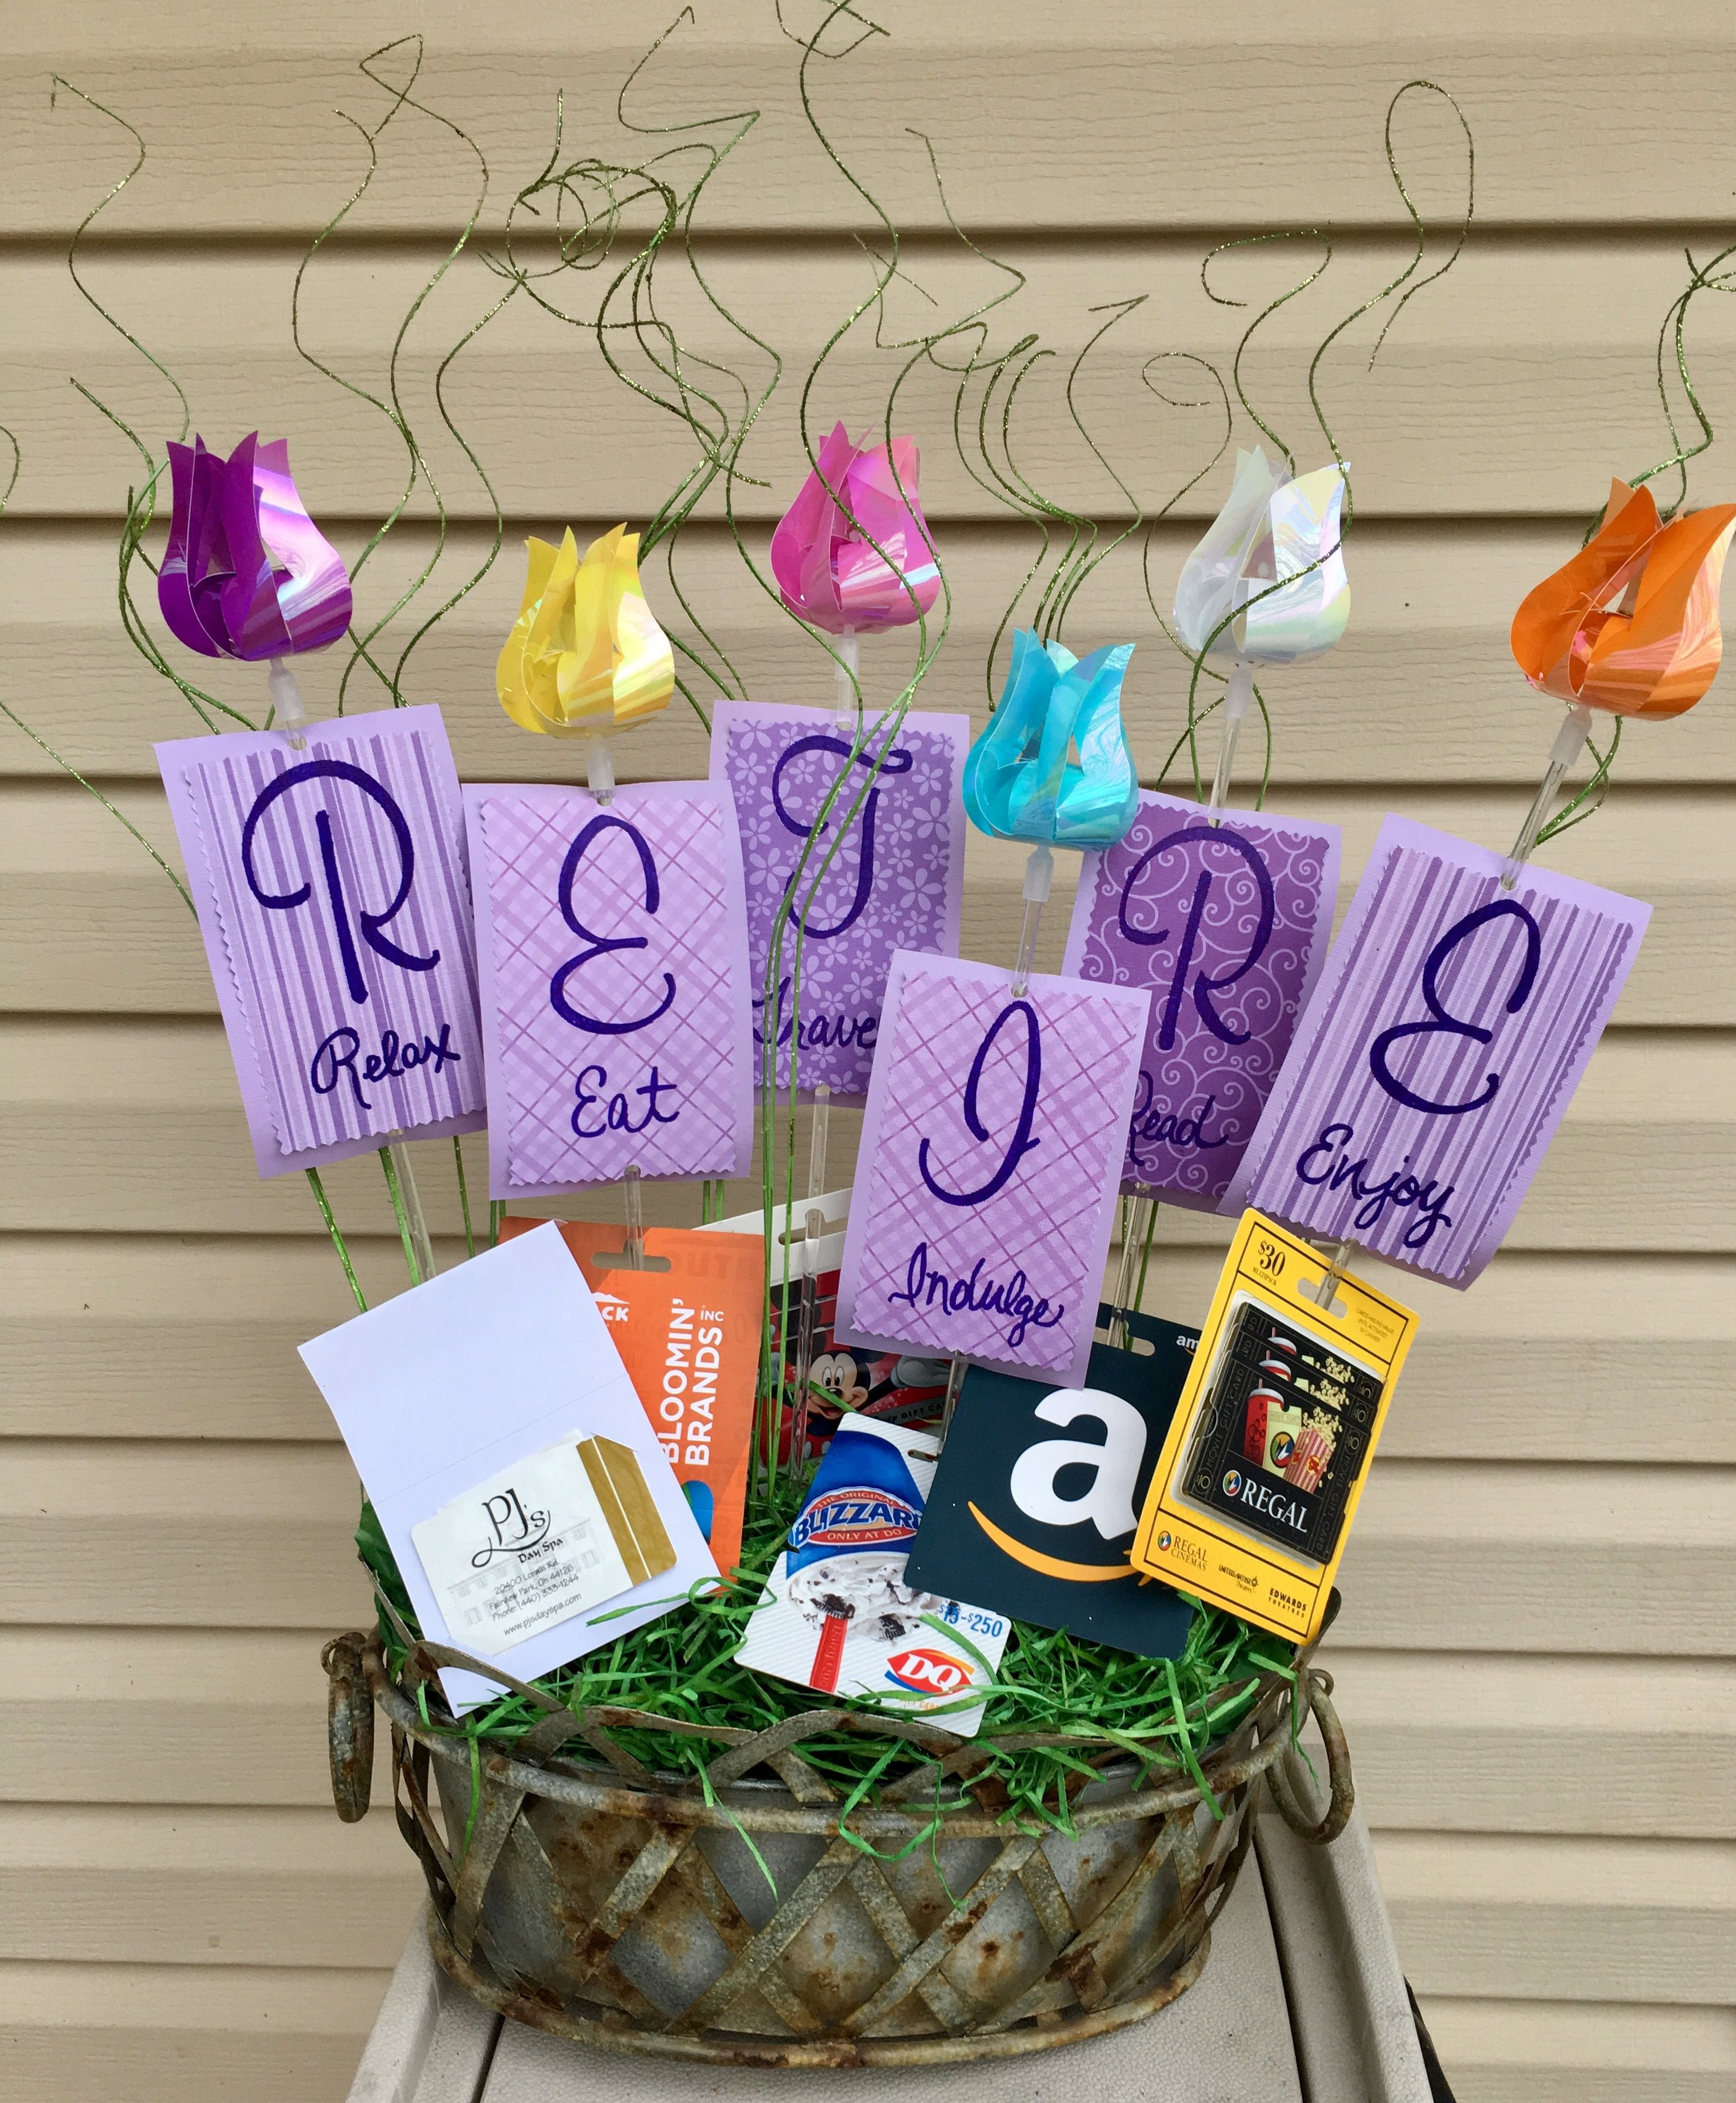 Female Retirement Party Ideas
 Retirement t basket with t cards Relax Eat Travel